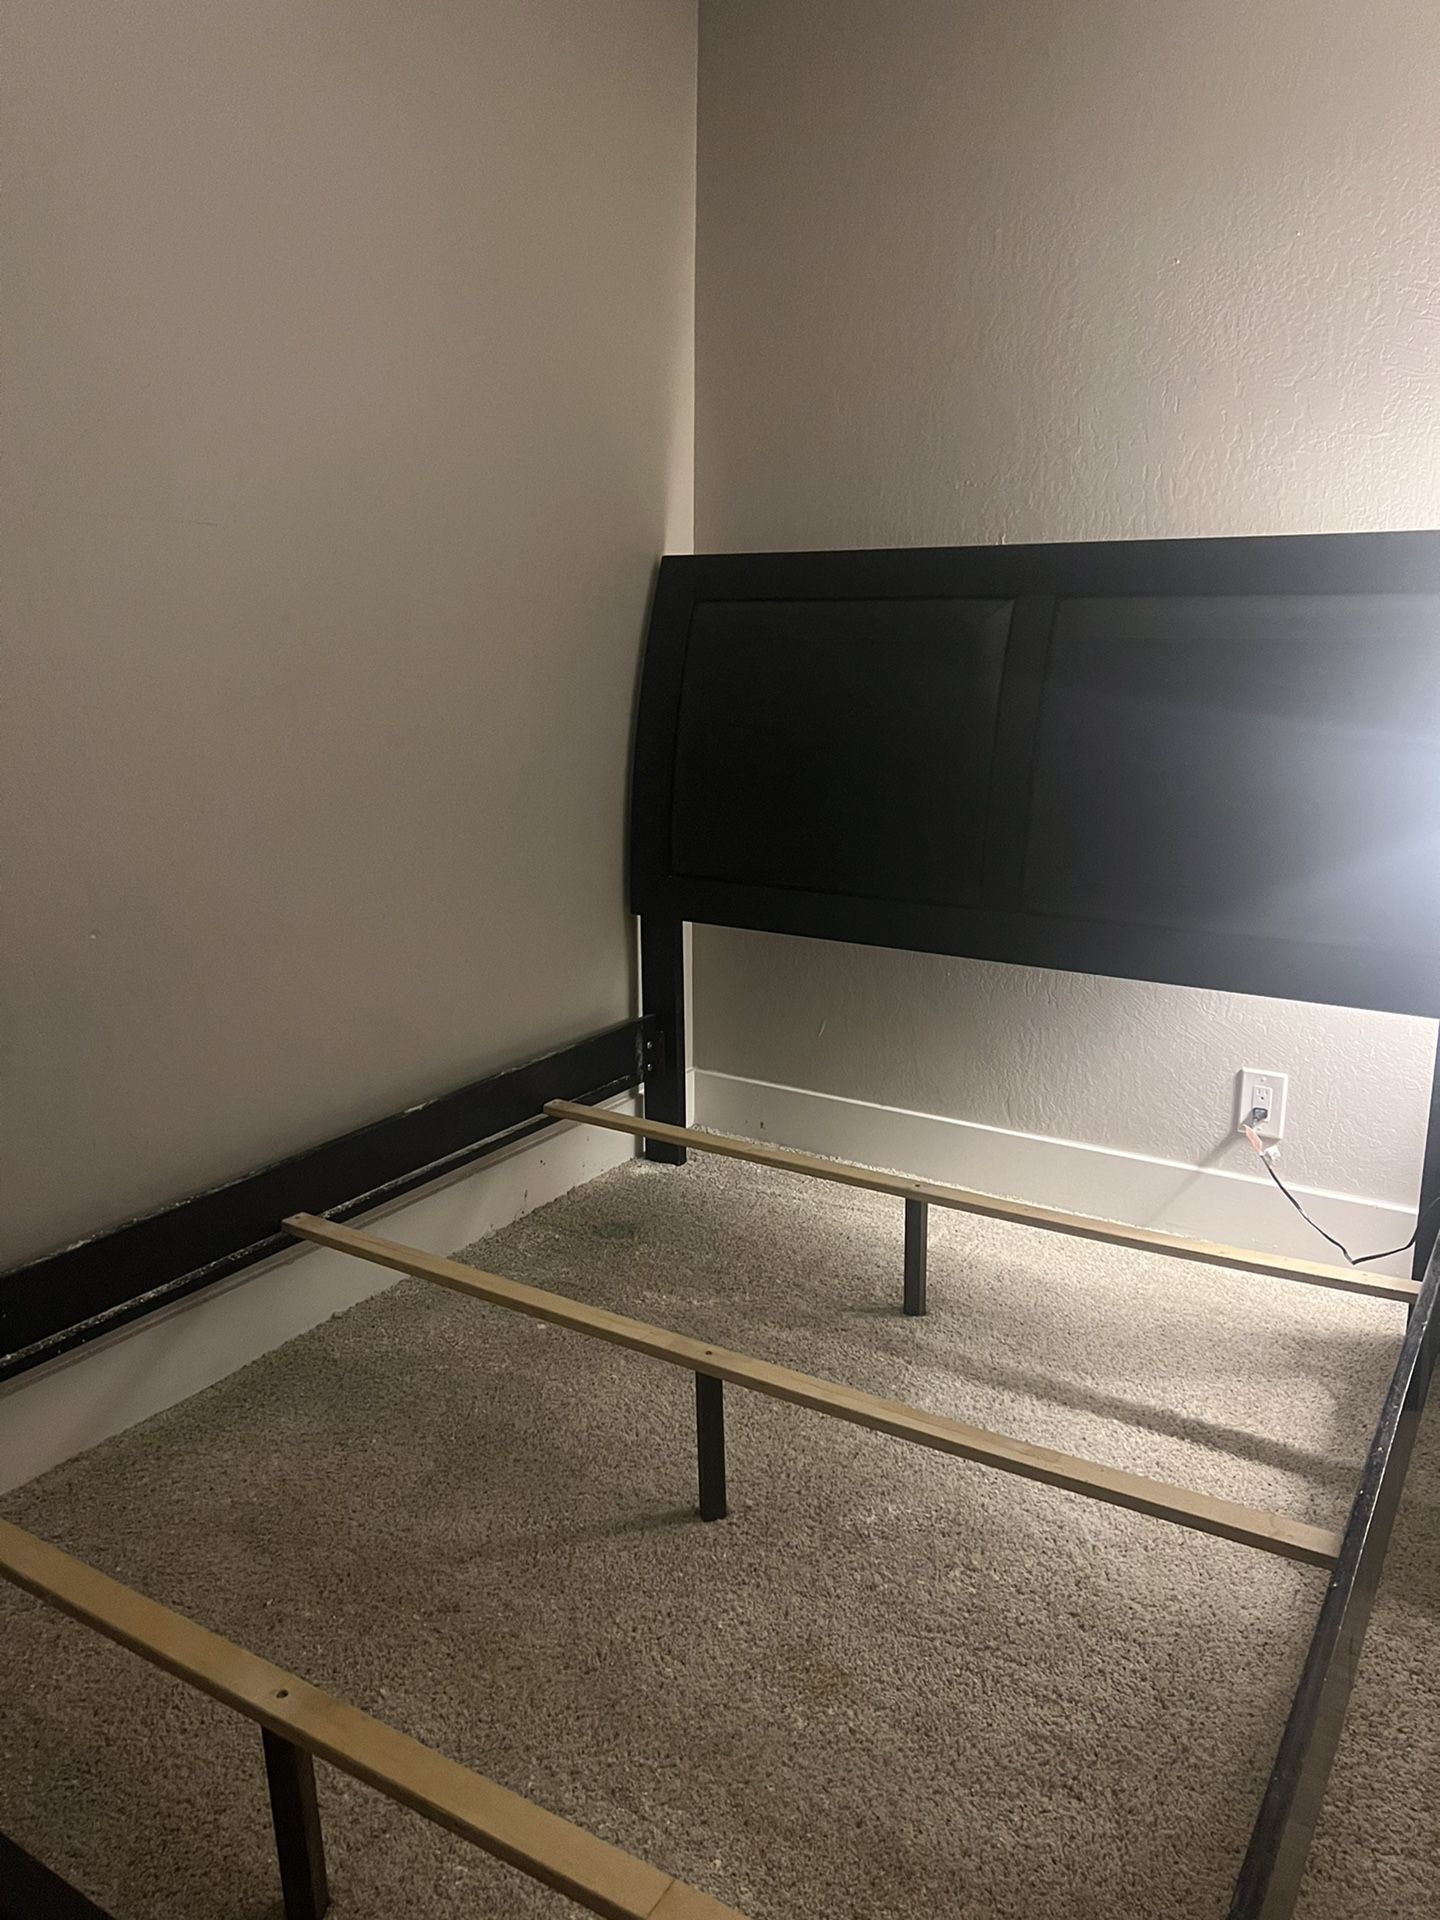 Queen Sized Bed frame 